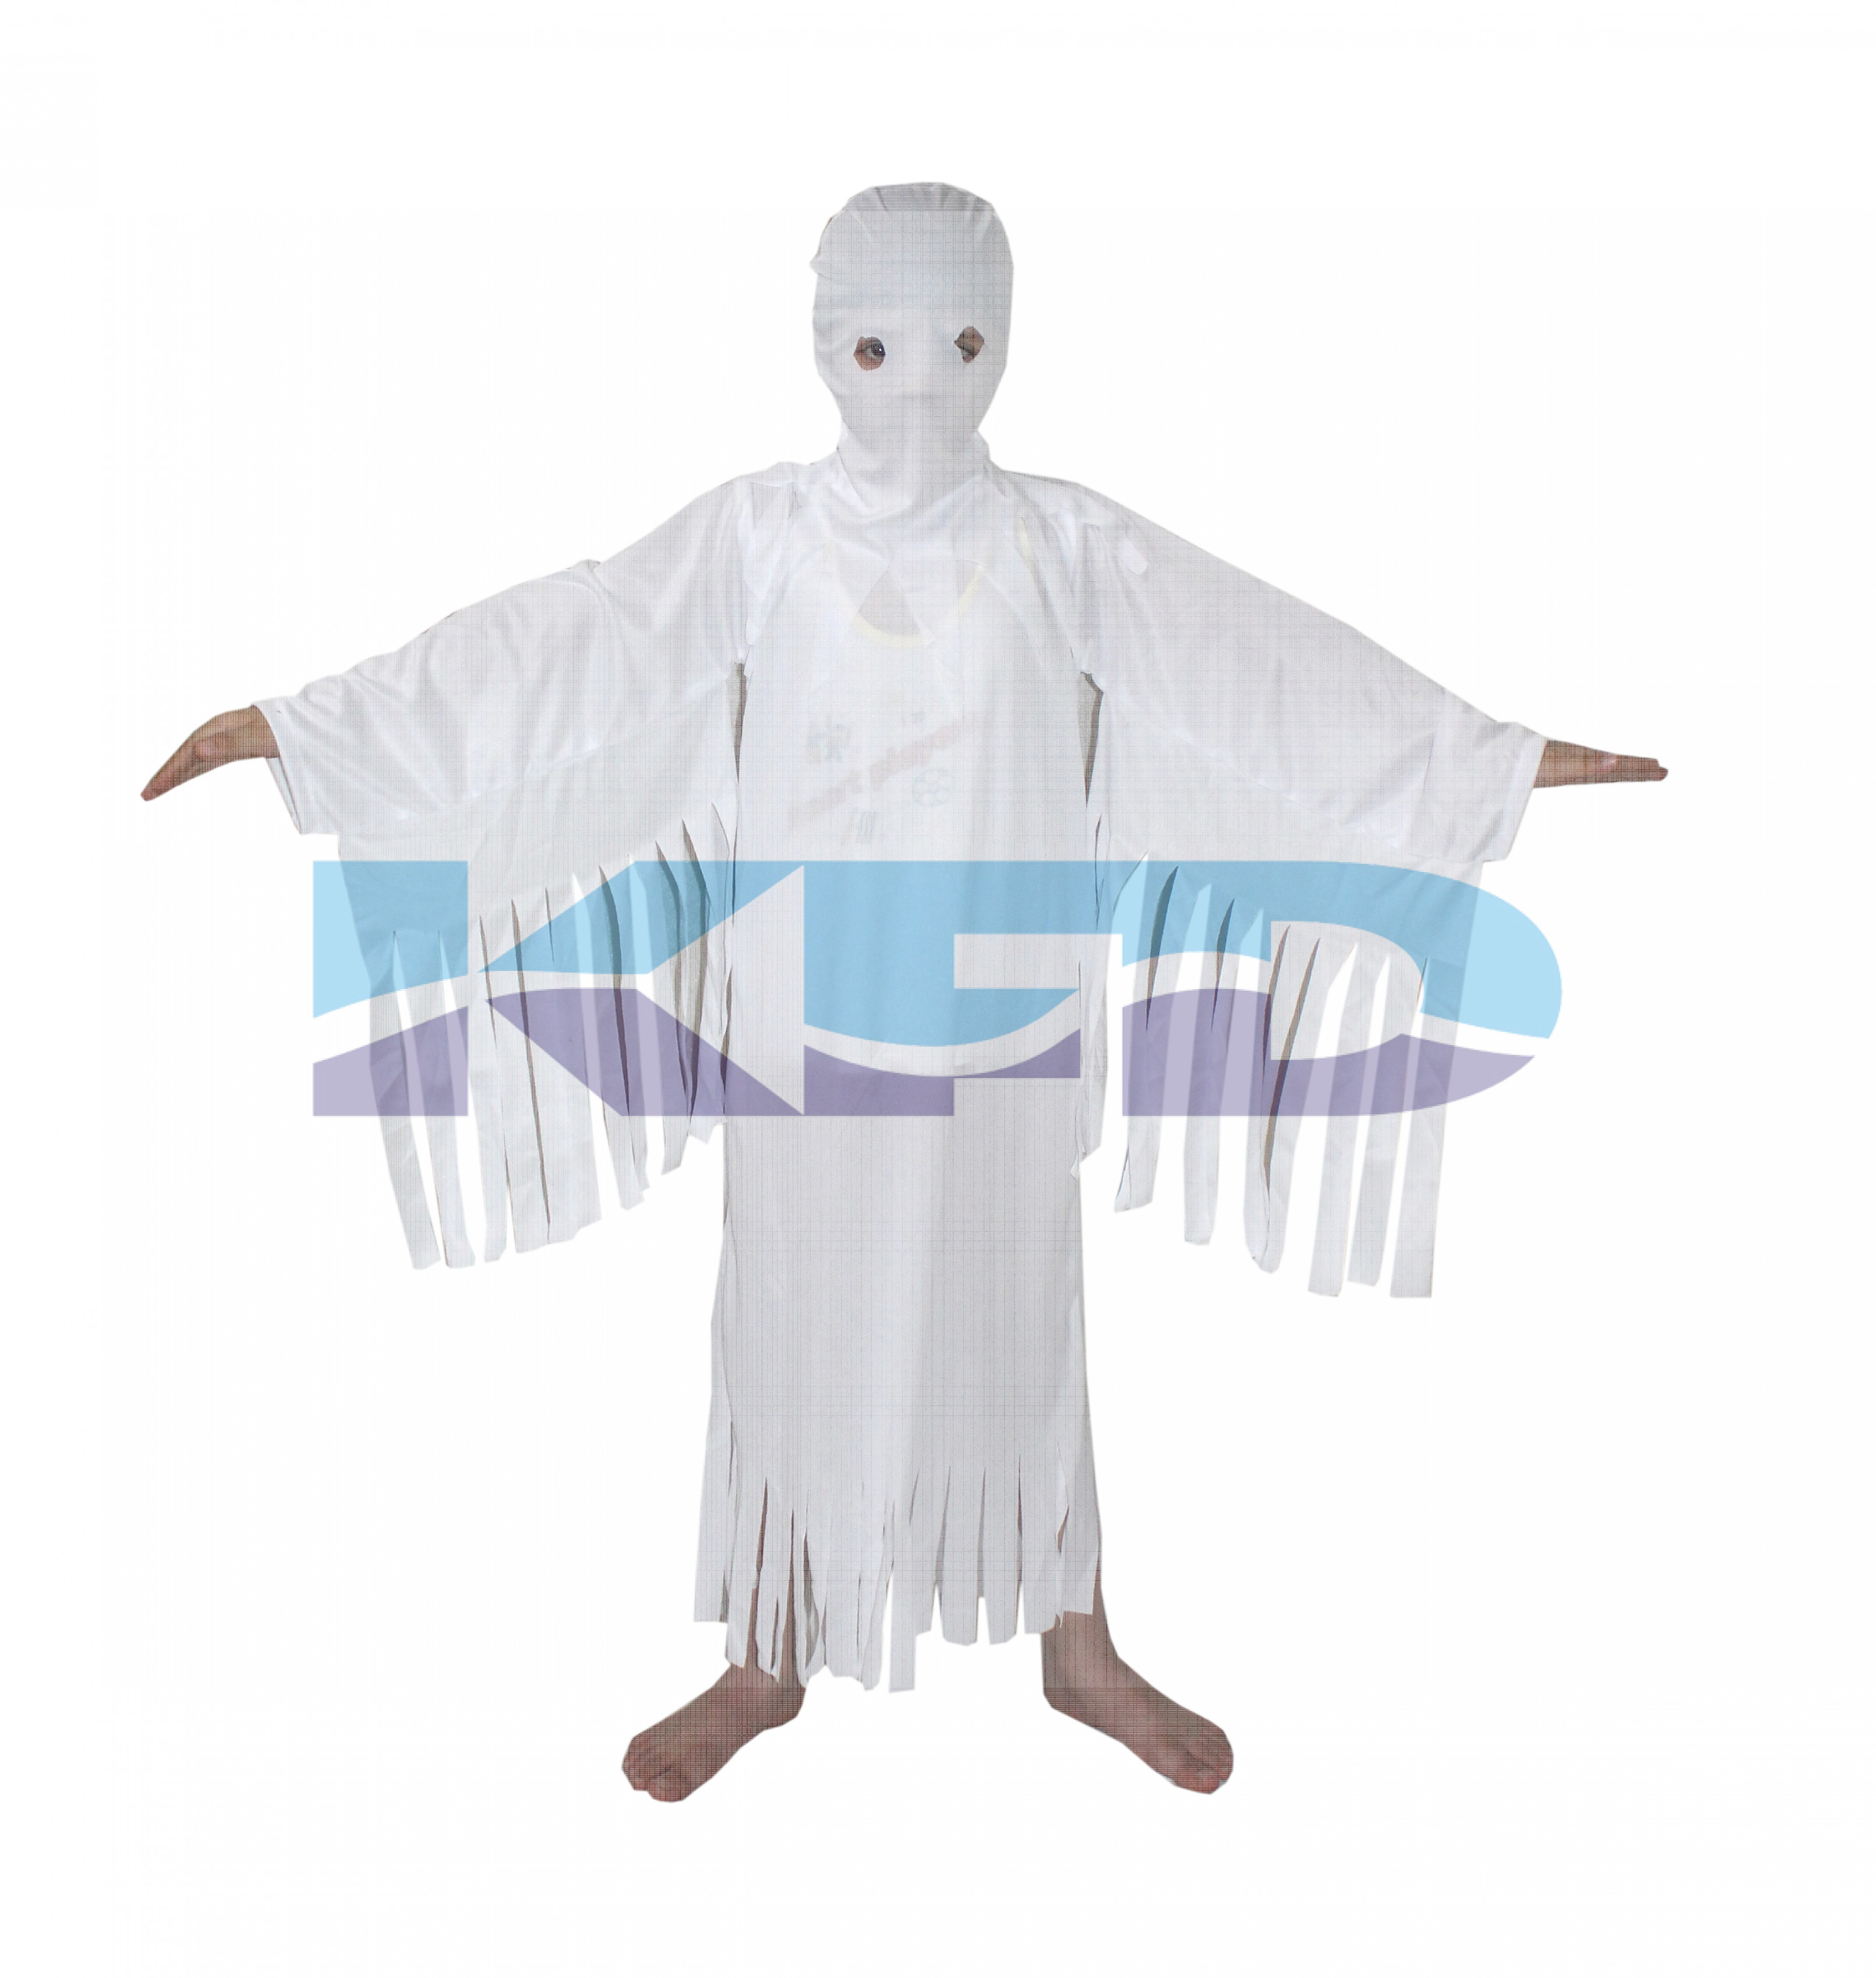  White Ghost Halloween Costume/California Costume For School Annual function/Theme Party/Competition/Stage Shows/Birthday Party Dress